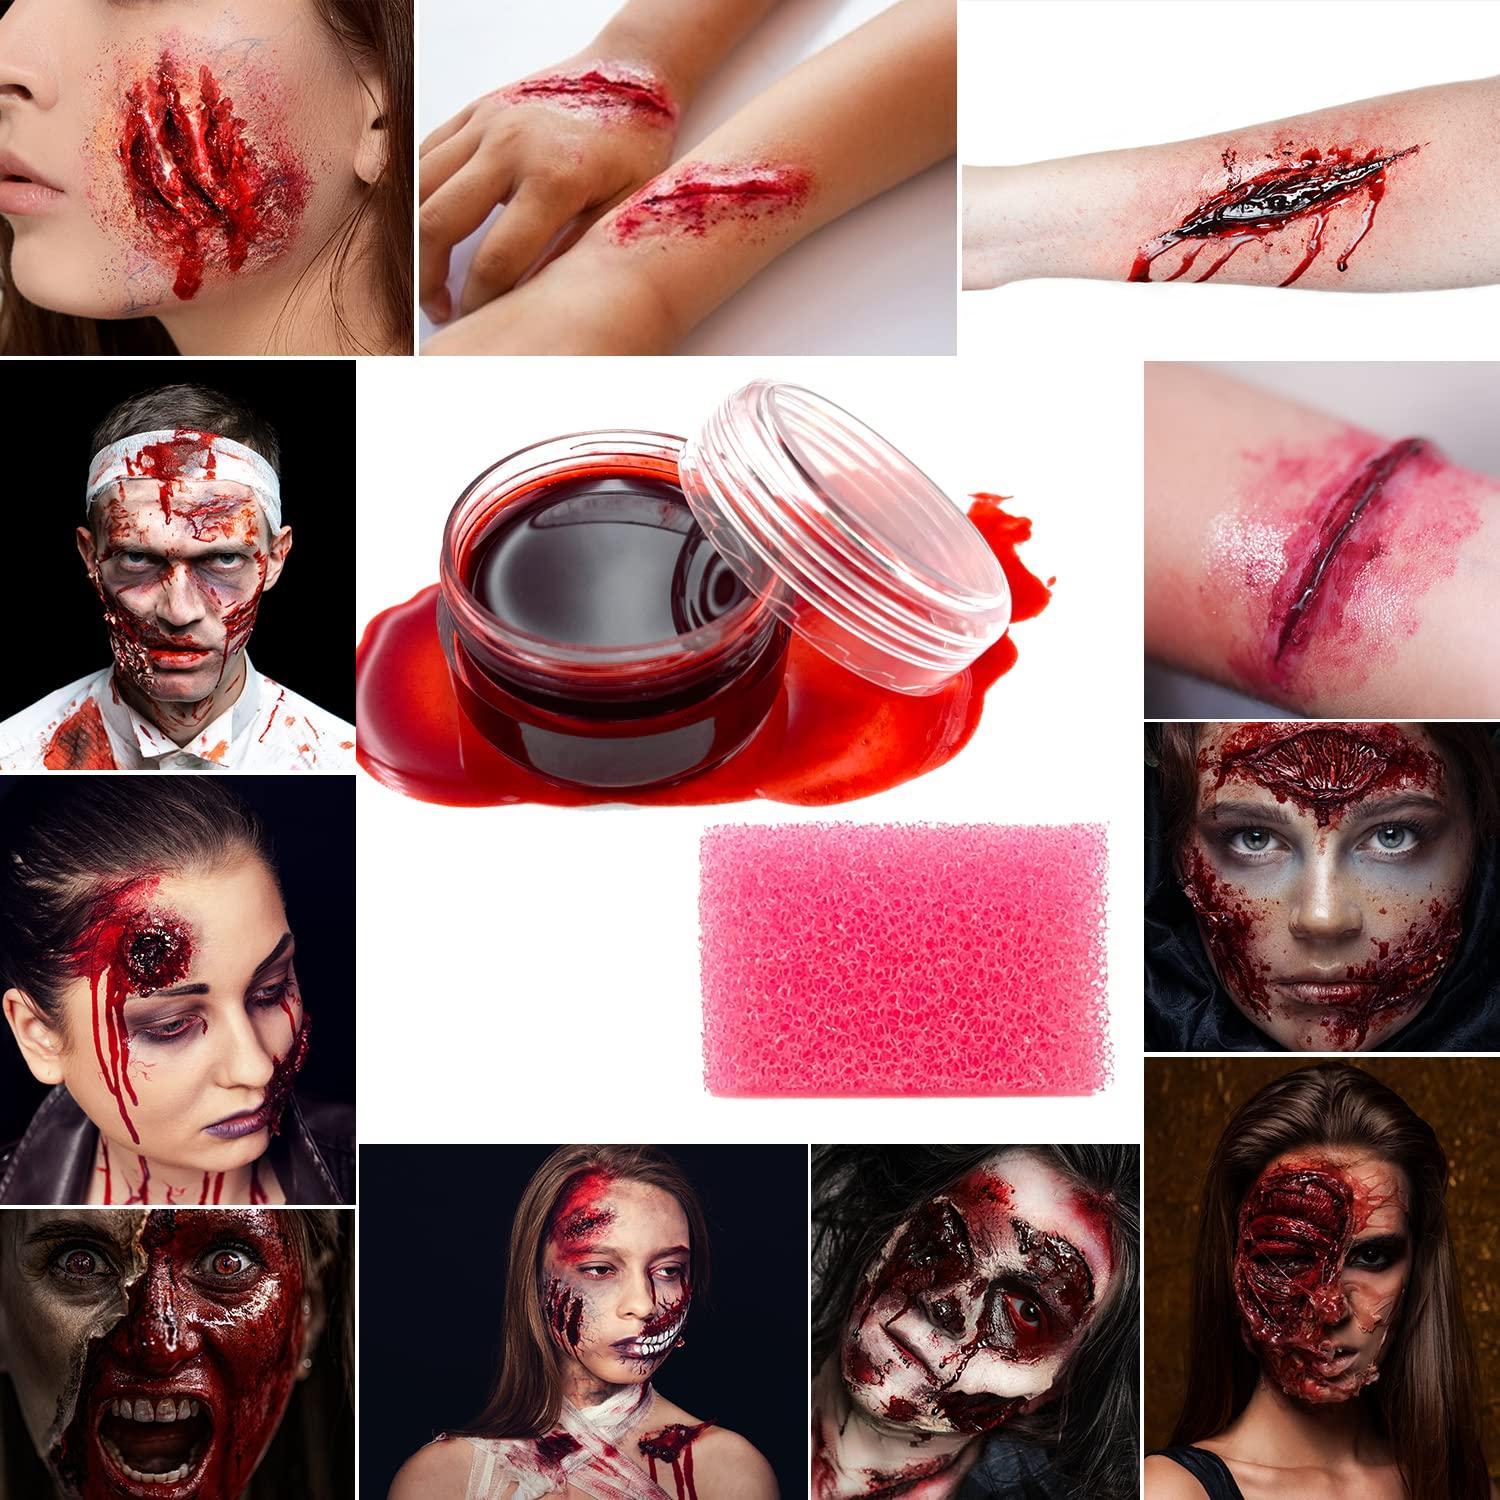 Scar Wax Professional Grade Easy to Use Fake scars for Realistic Special  Effects Makeup Halloween Parties TV Shows